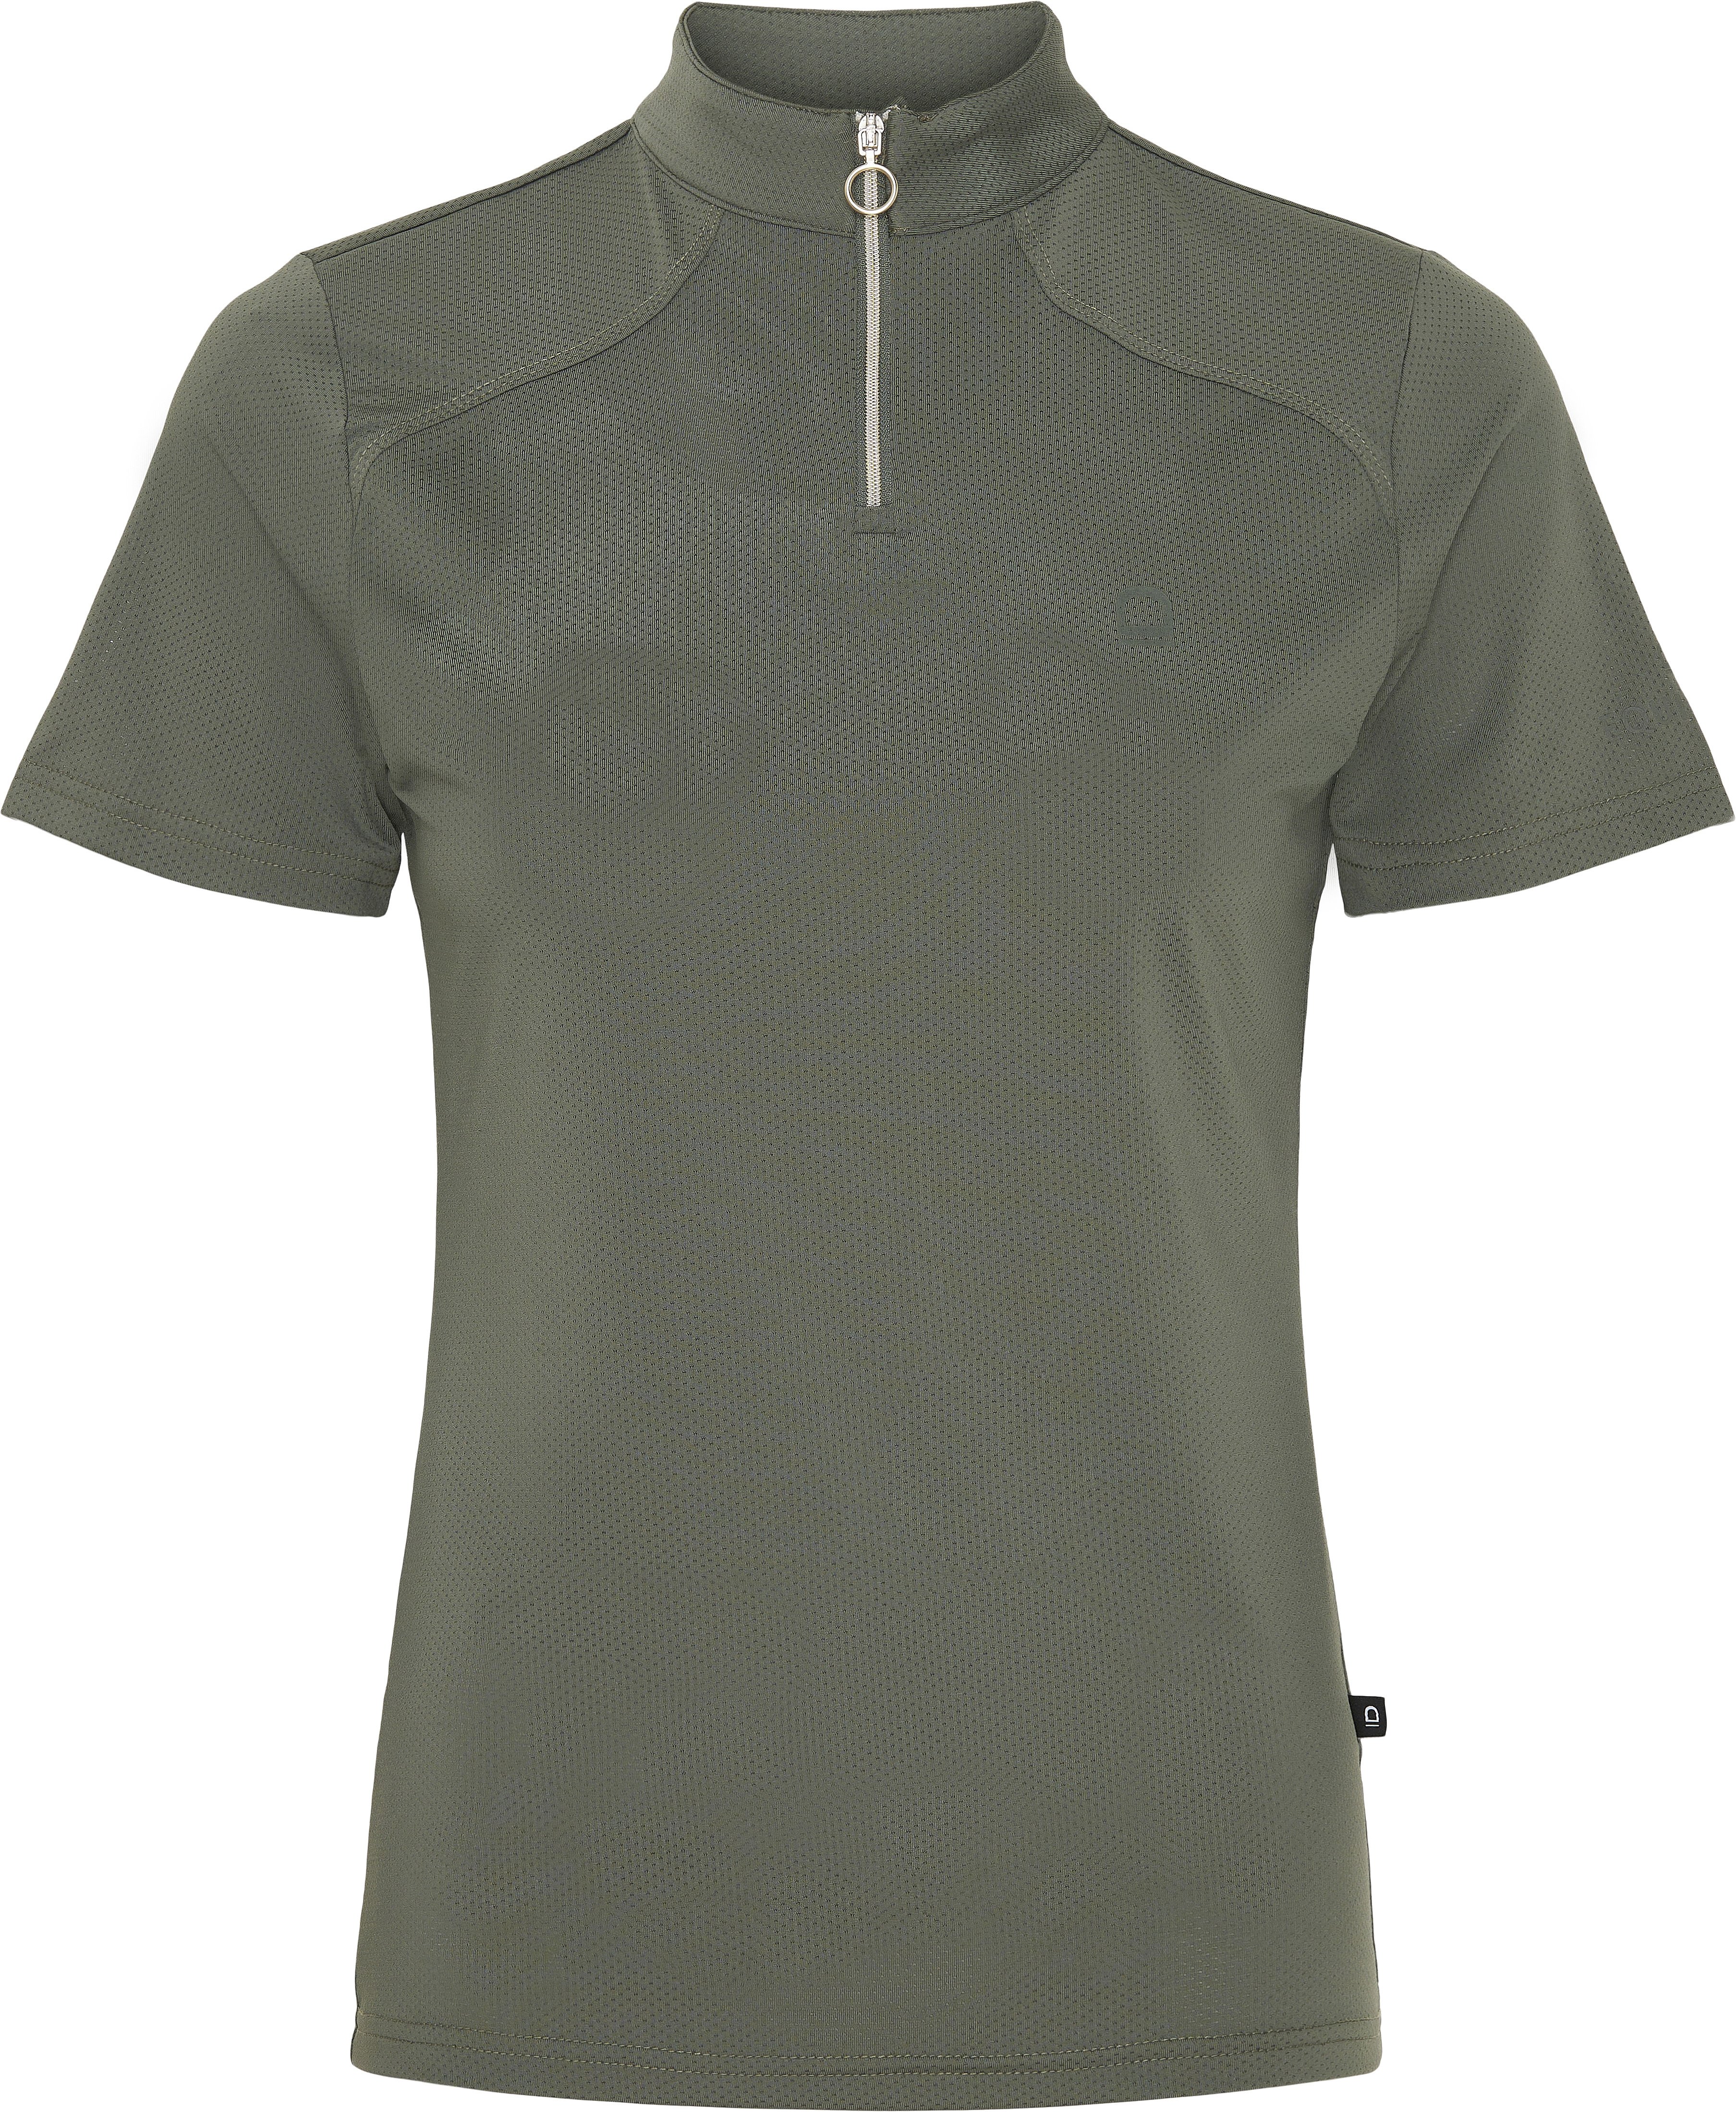 Equipage Hasty T-shirt - Forest Green 